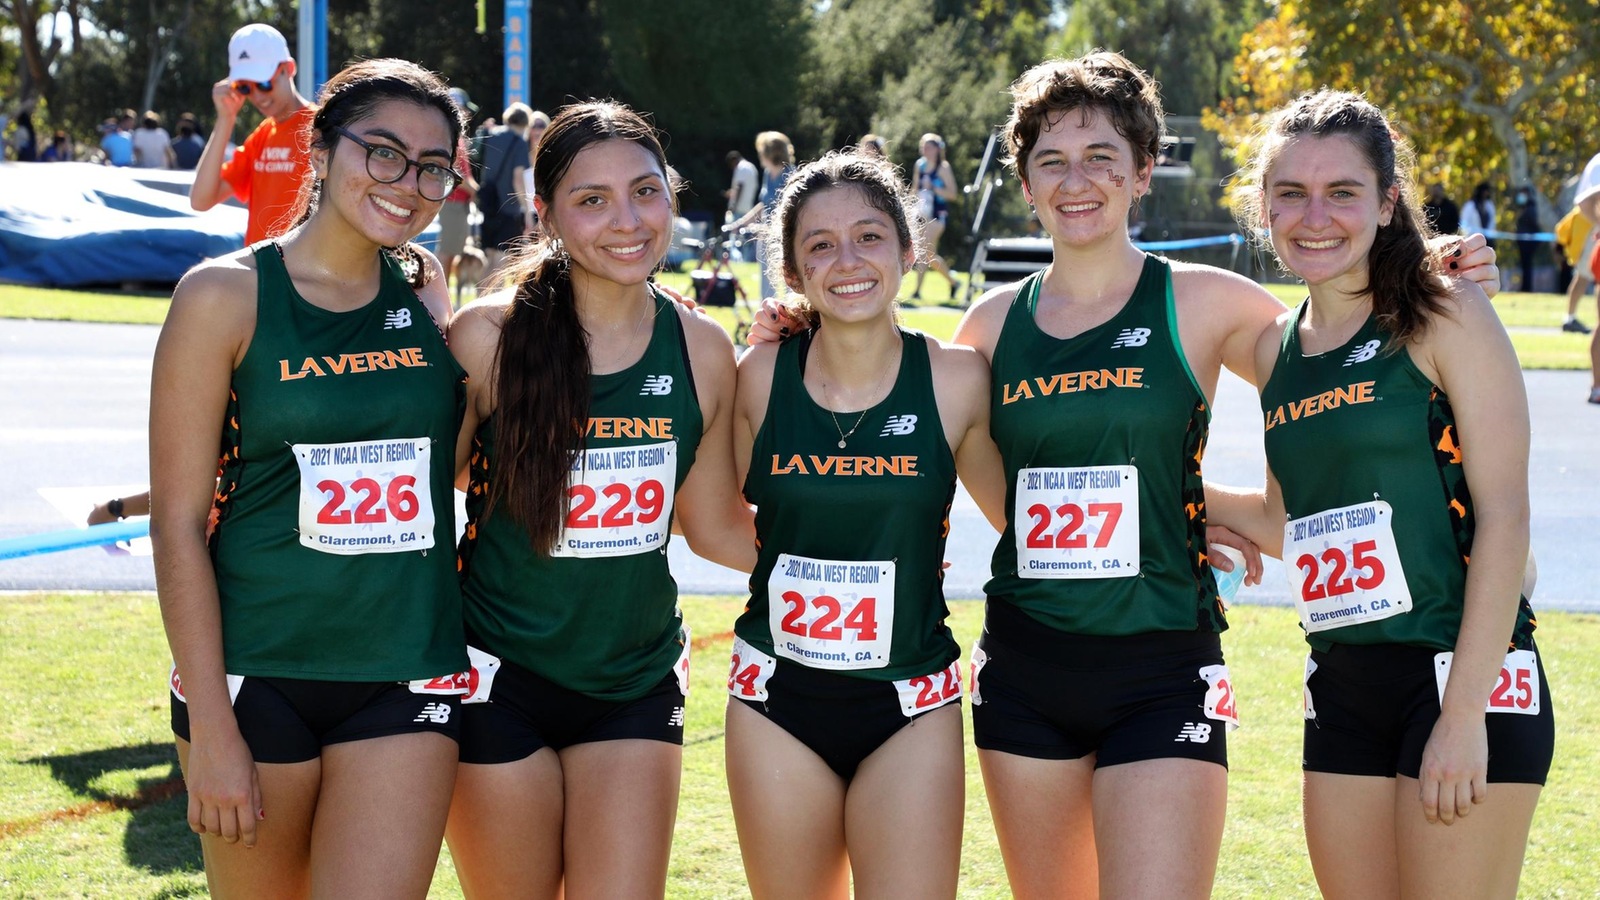 Women's Cross Country Finishes Season Strong at Regionals